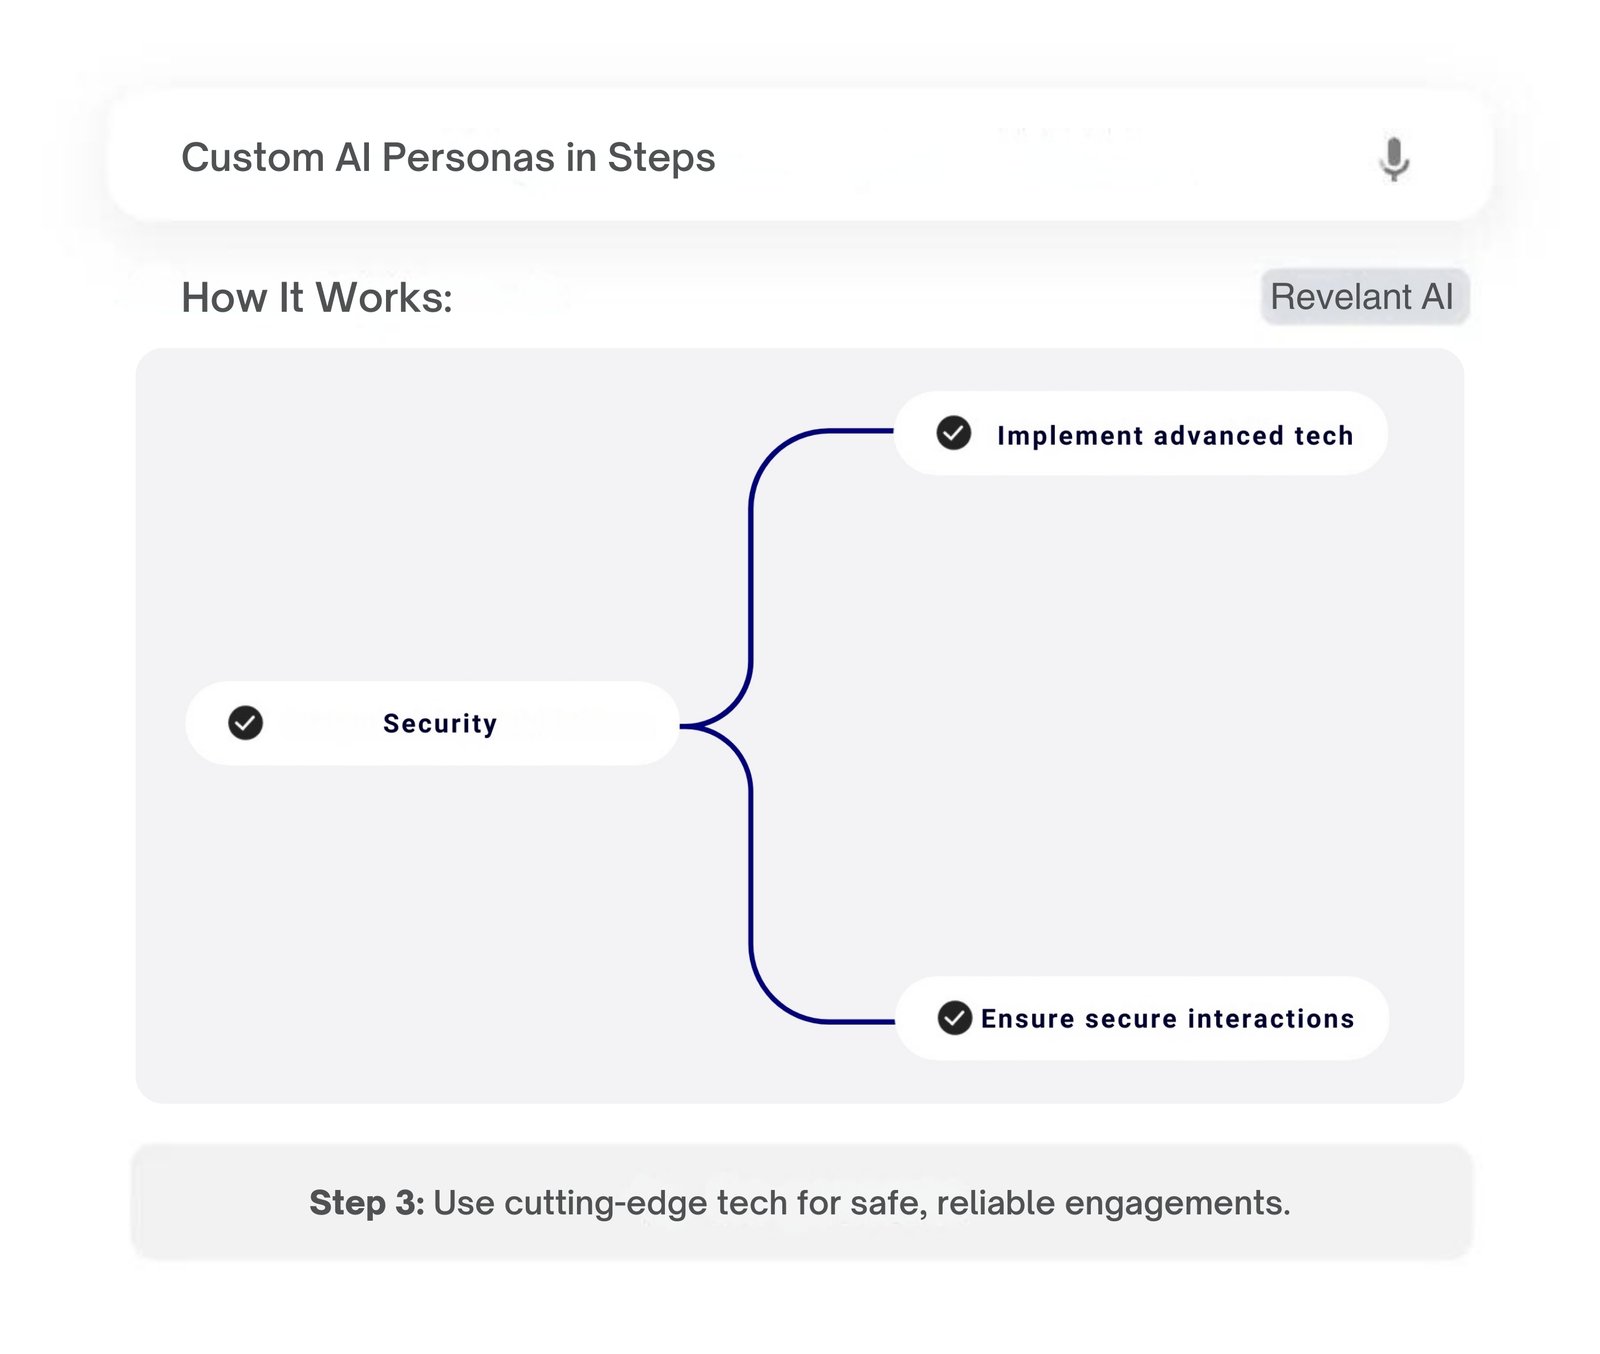 Step 3 in the process of creating custom AI personas at Revelant AI, highlighting the implementation of advanced tech for security and secure interactions.